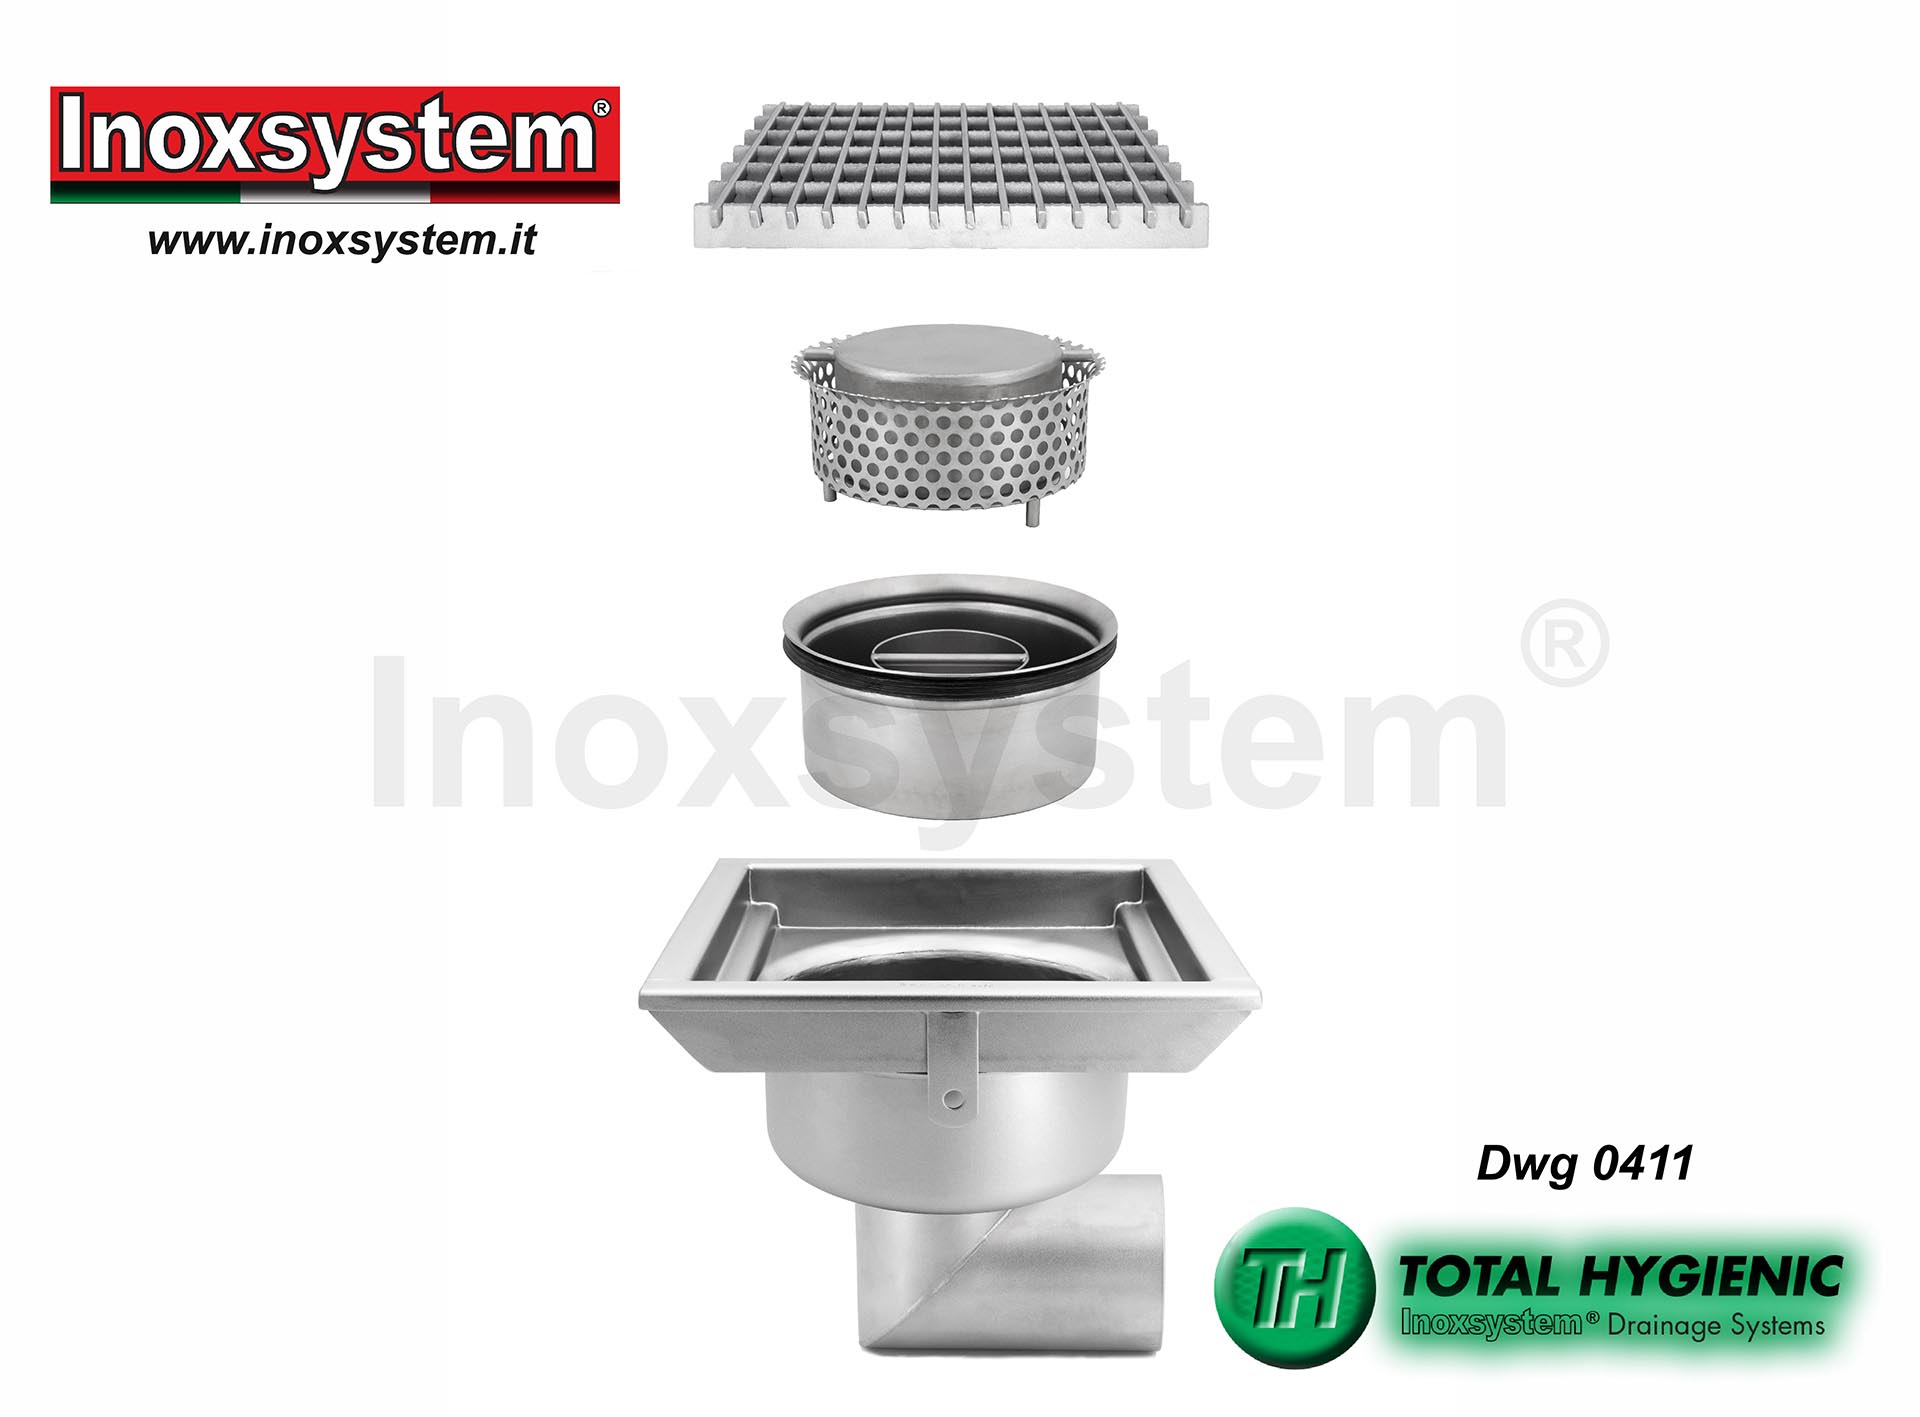 https://www.inoxsystem.it/images/total-hygienic-en/0411-hygienic-floor-drains-grating-removable-cup-shaped-odor-trap-stainless-steel.jpg